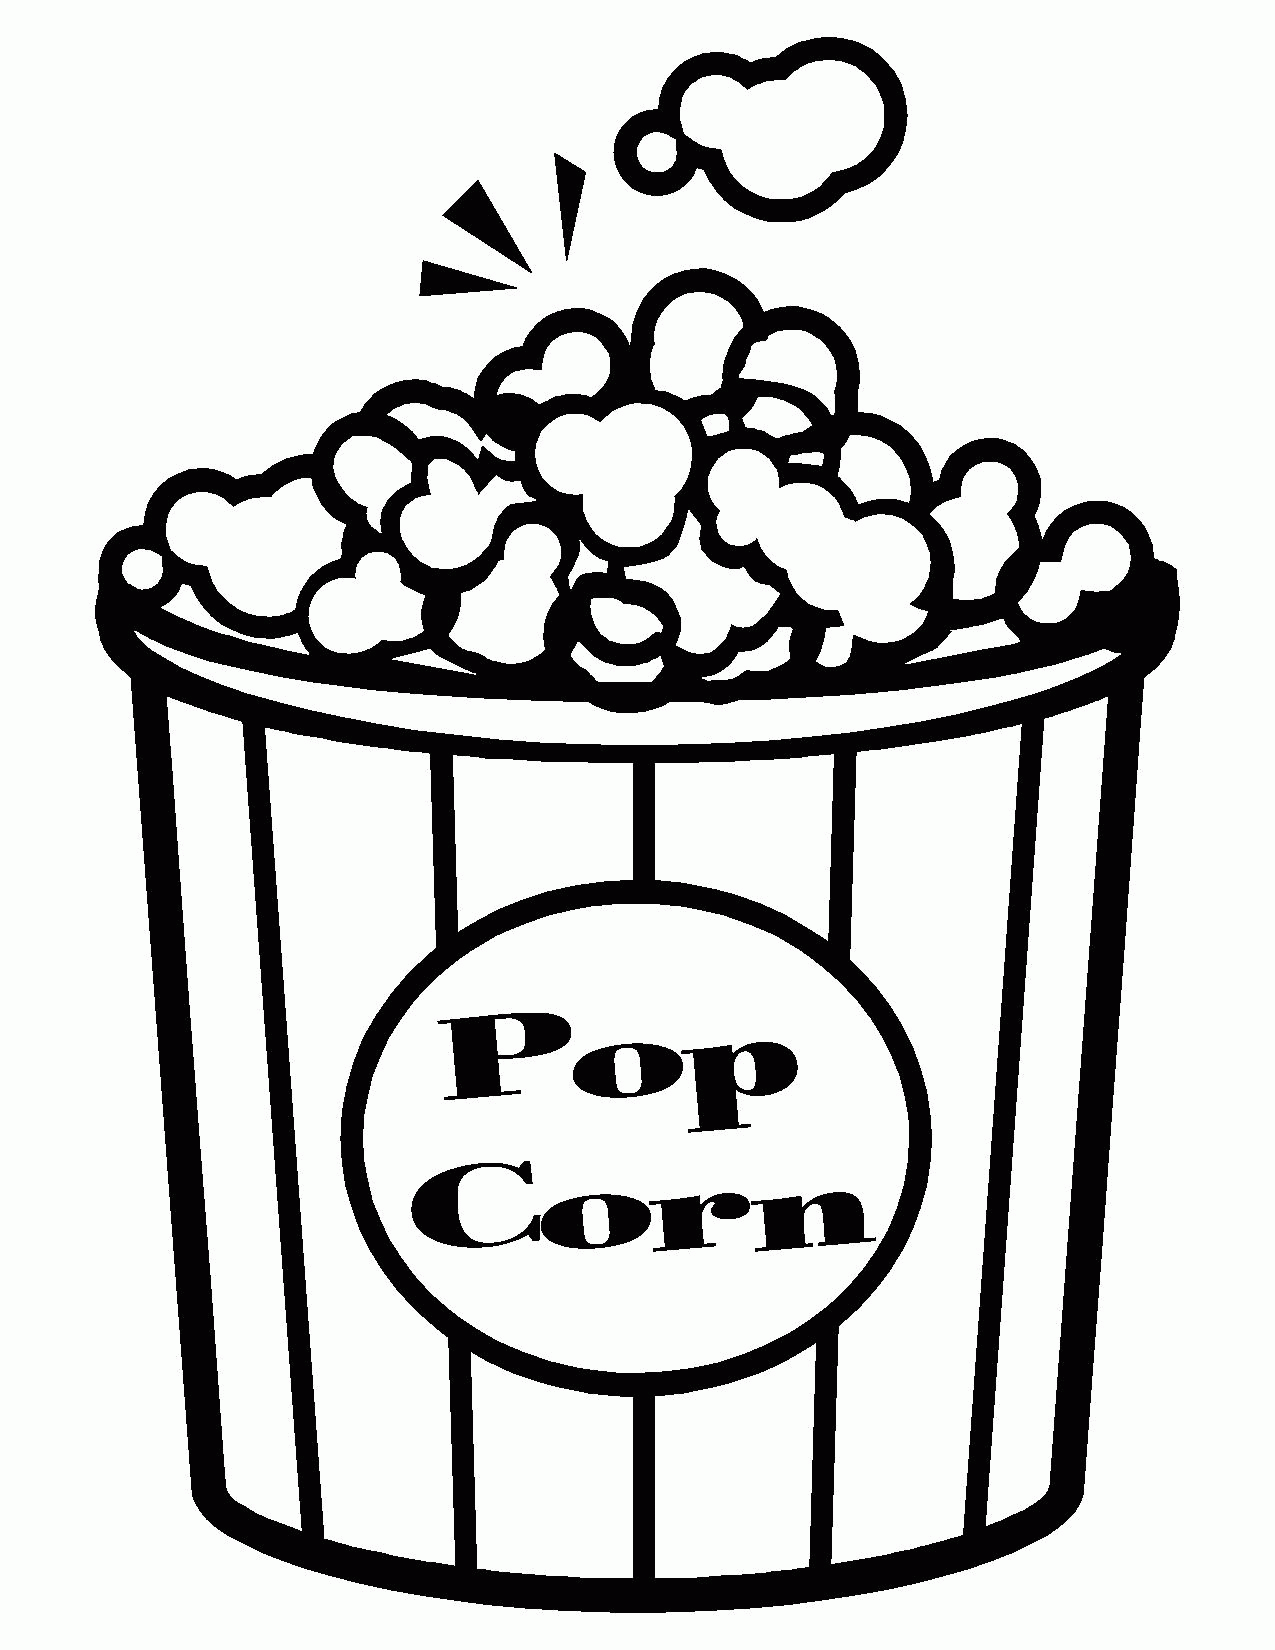 Free Popcorn Coloring Pages Printable, Download Free Clip